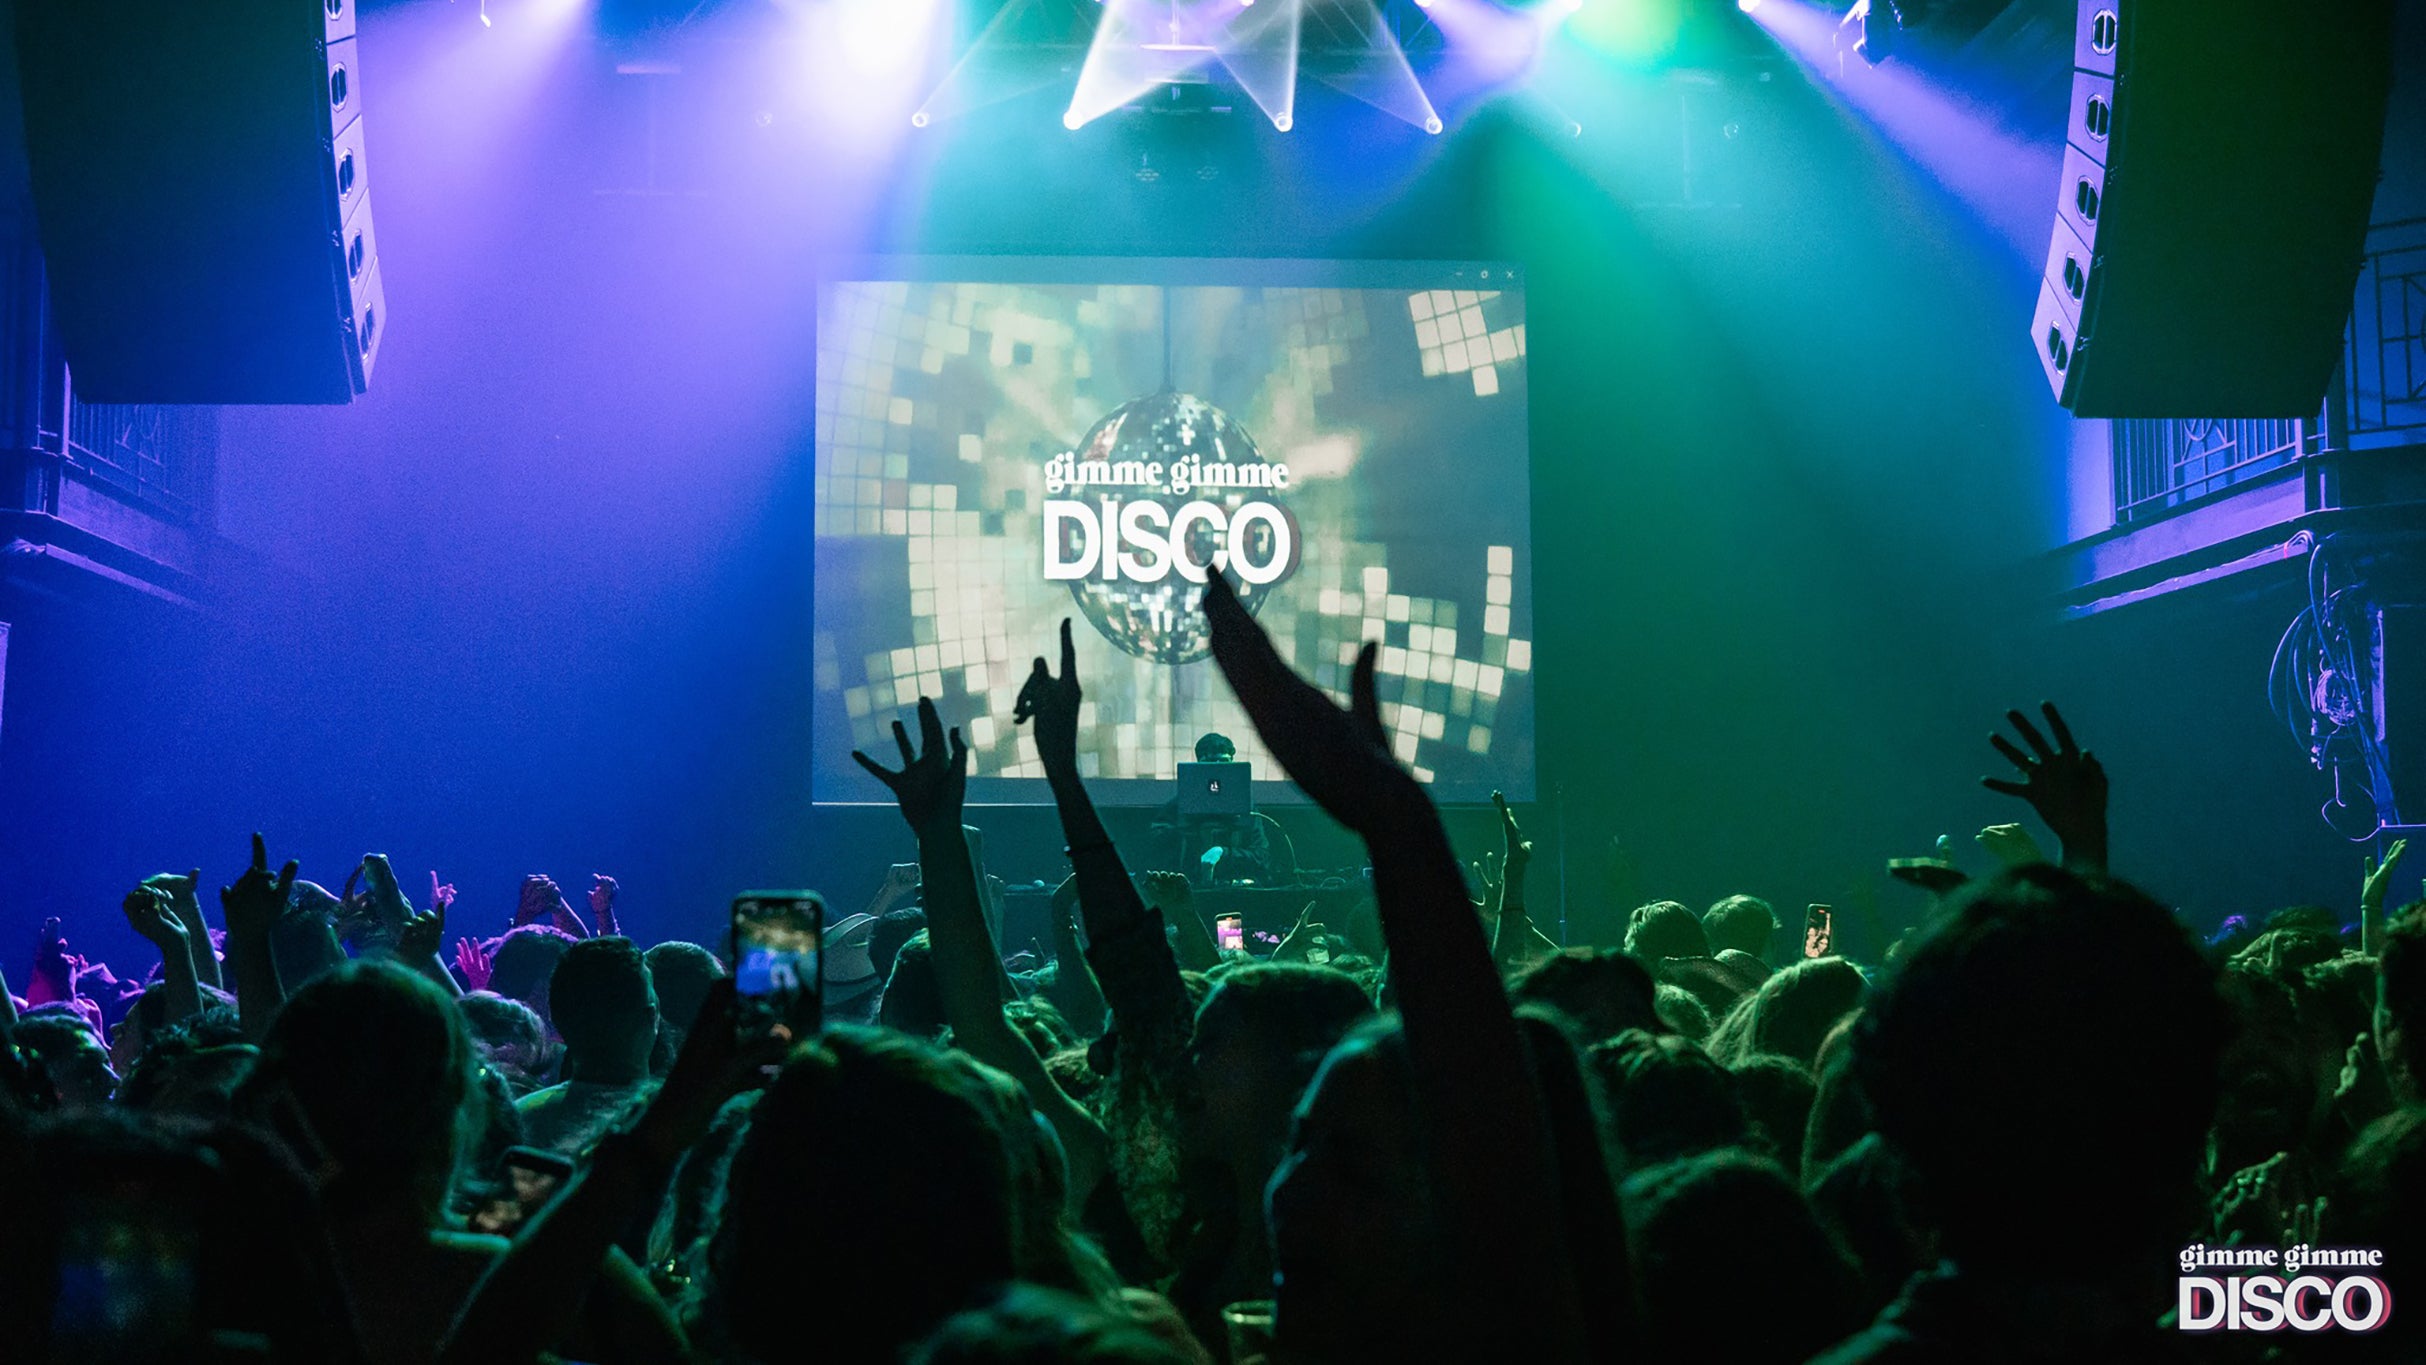 Gimme Gimme Disco - 18+ With Valid Id free pre-sale code